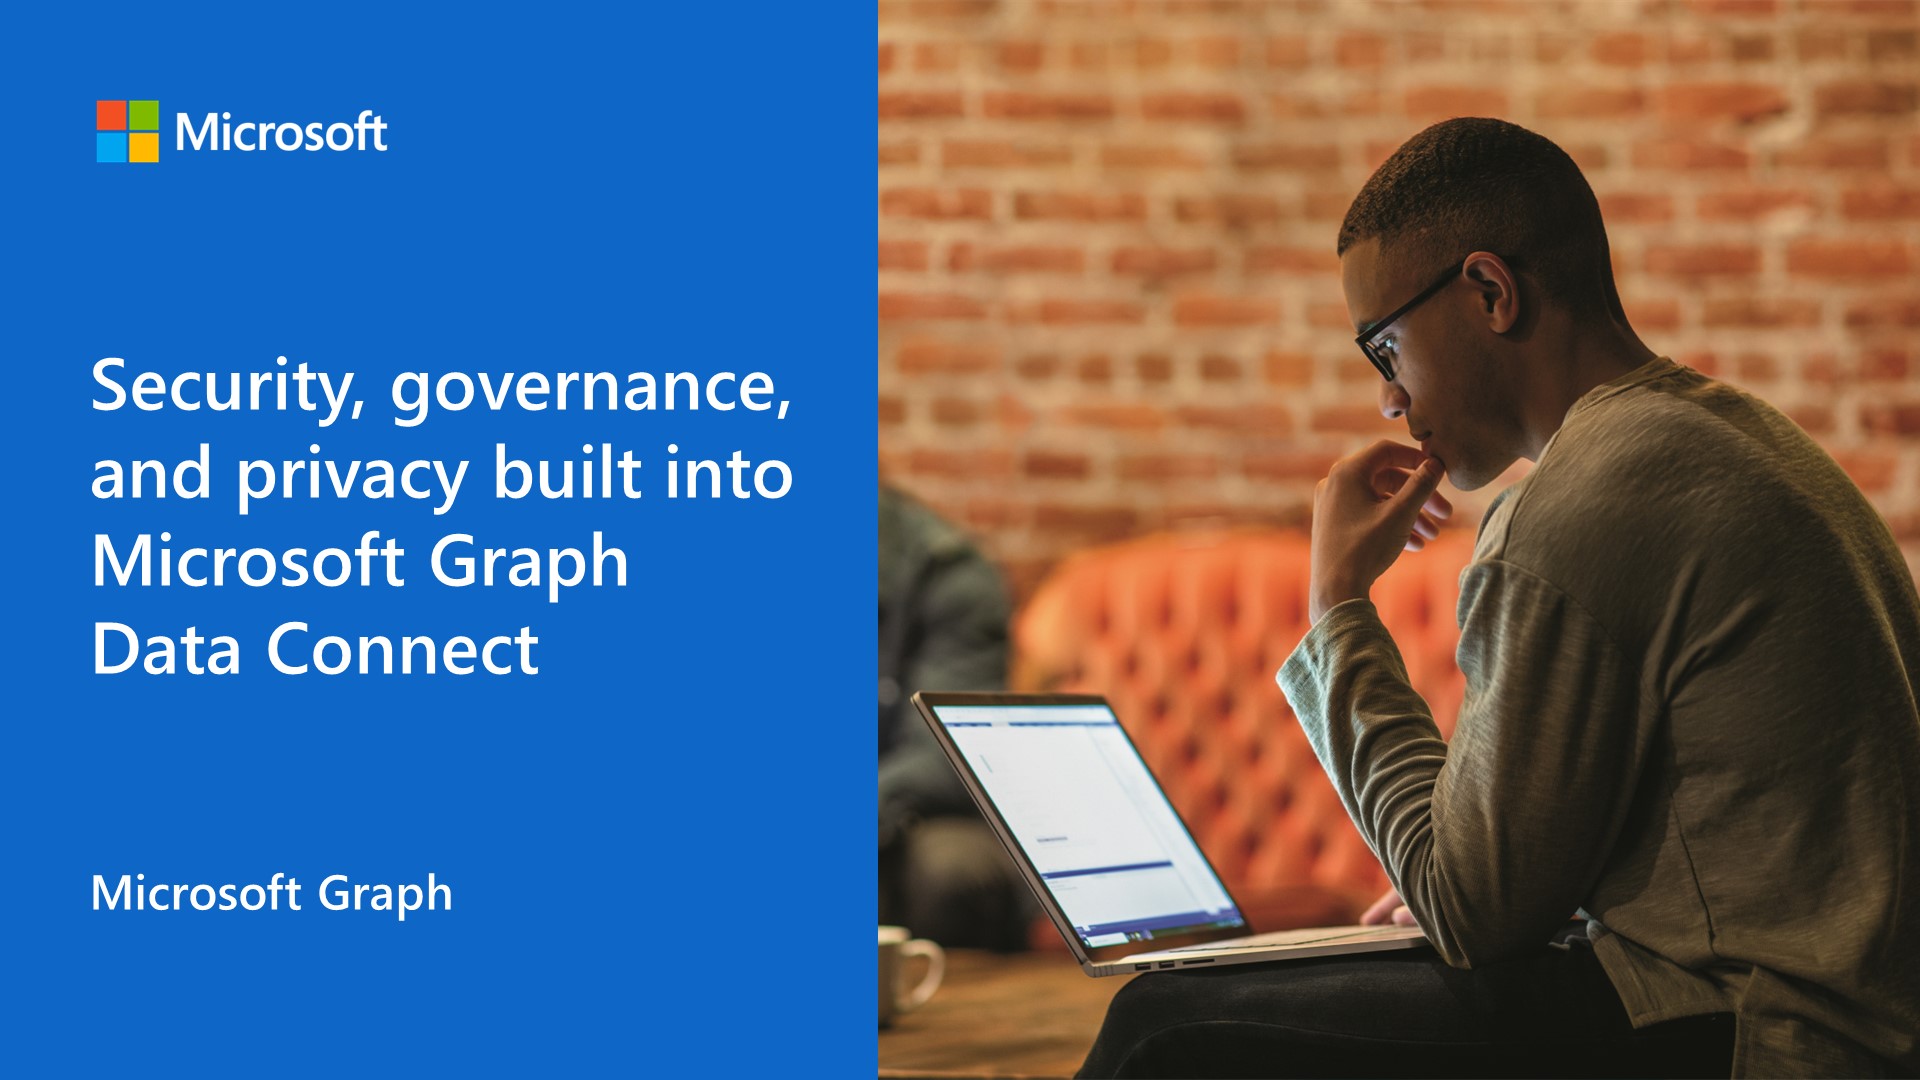 Security, governance and privacy built into Microsoft Graph Data Connect